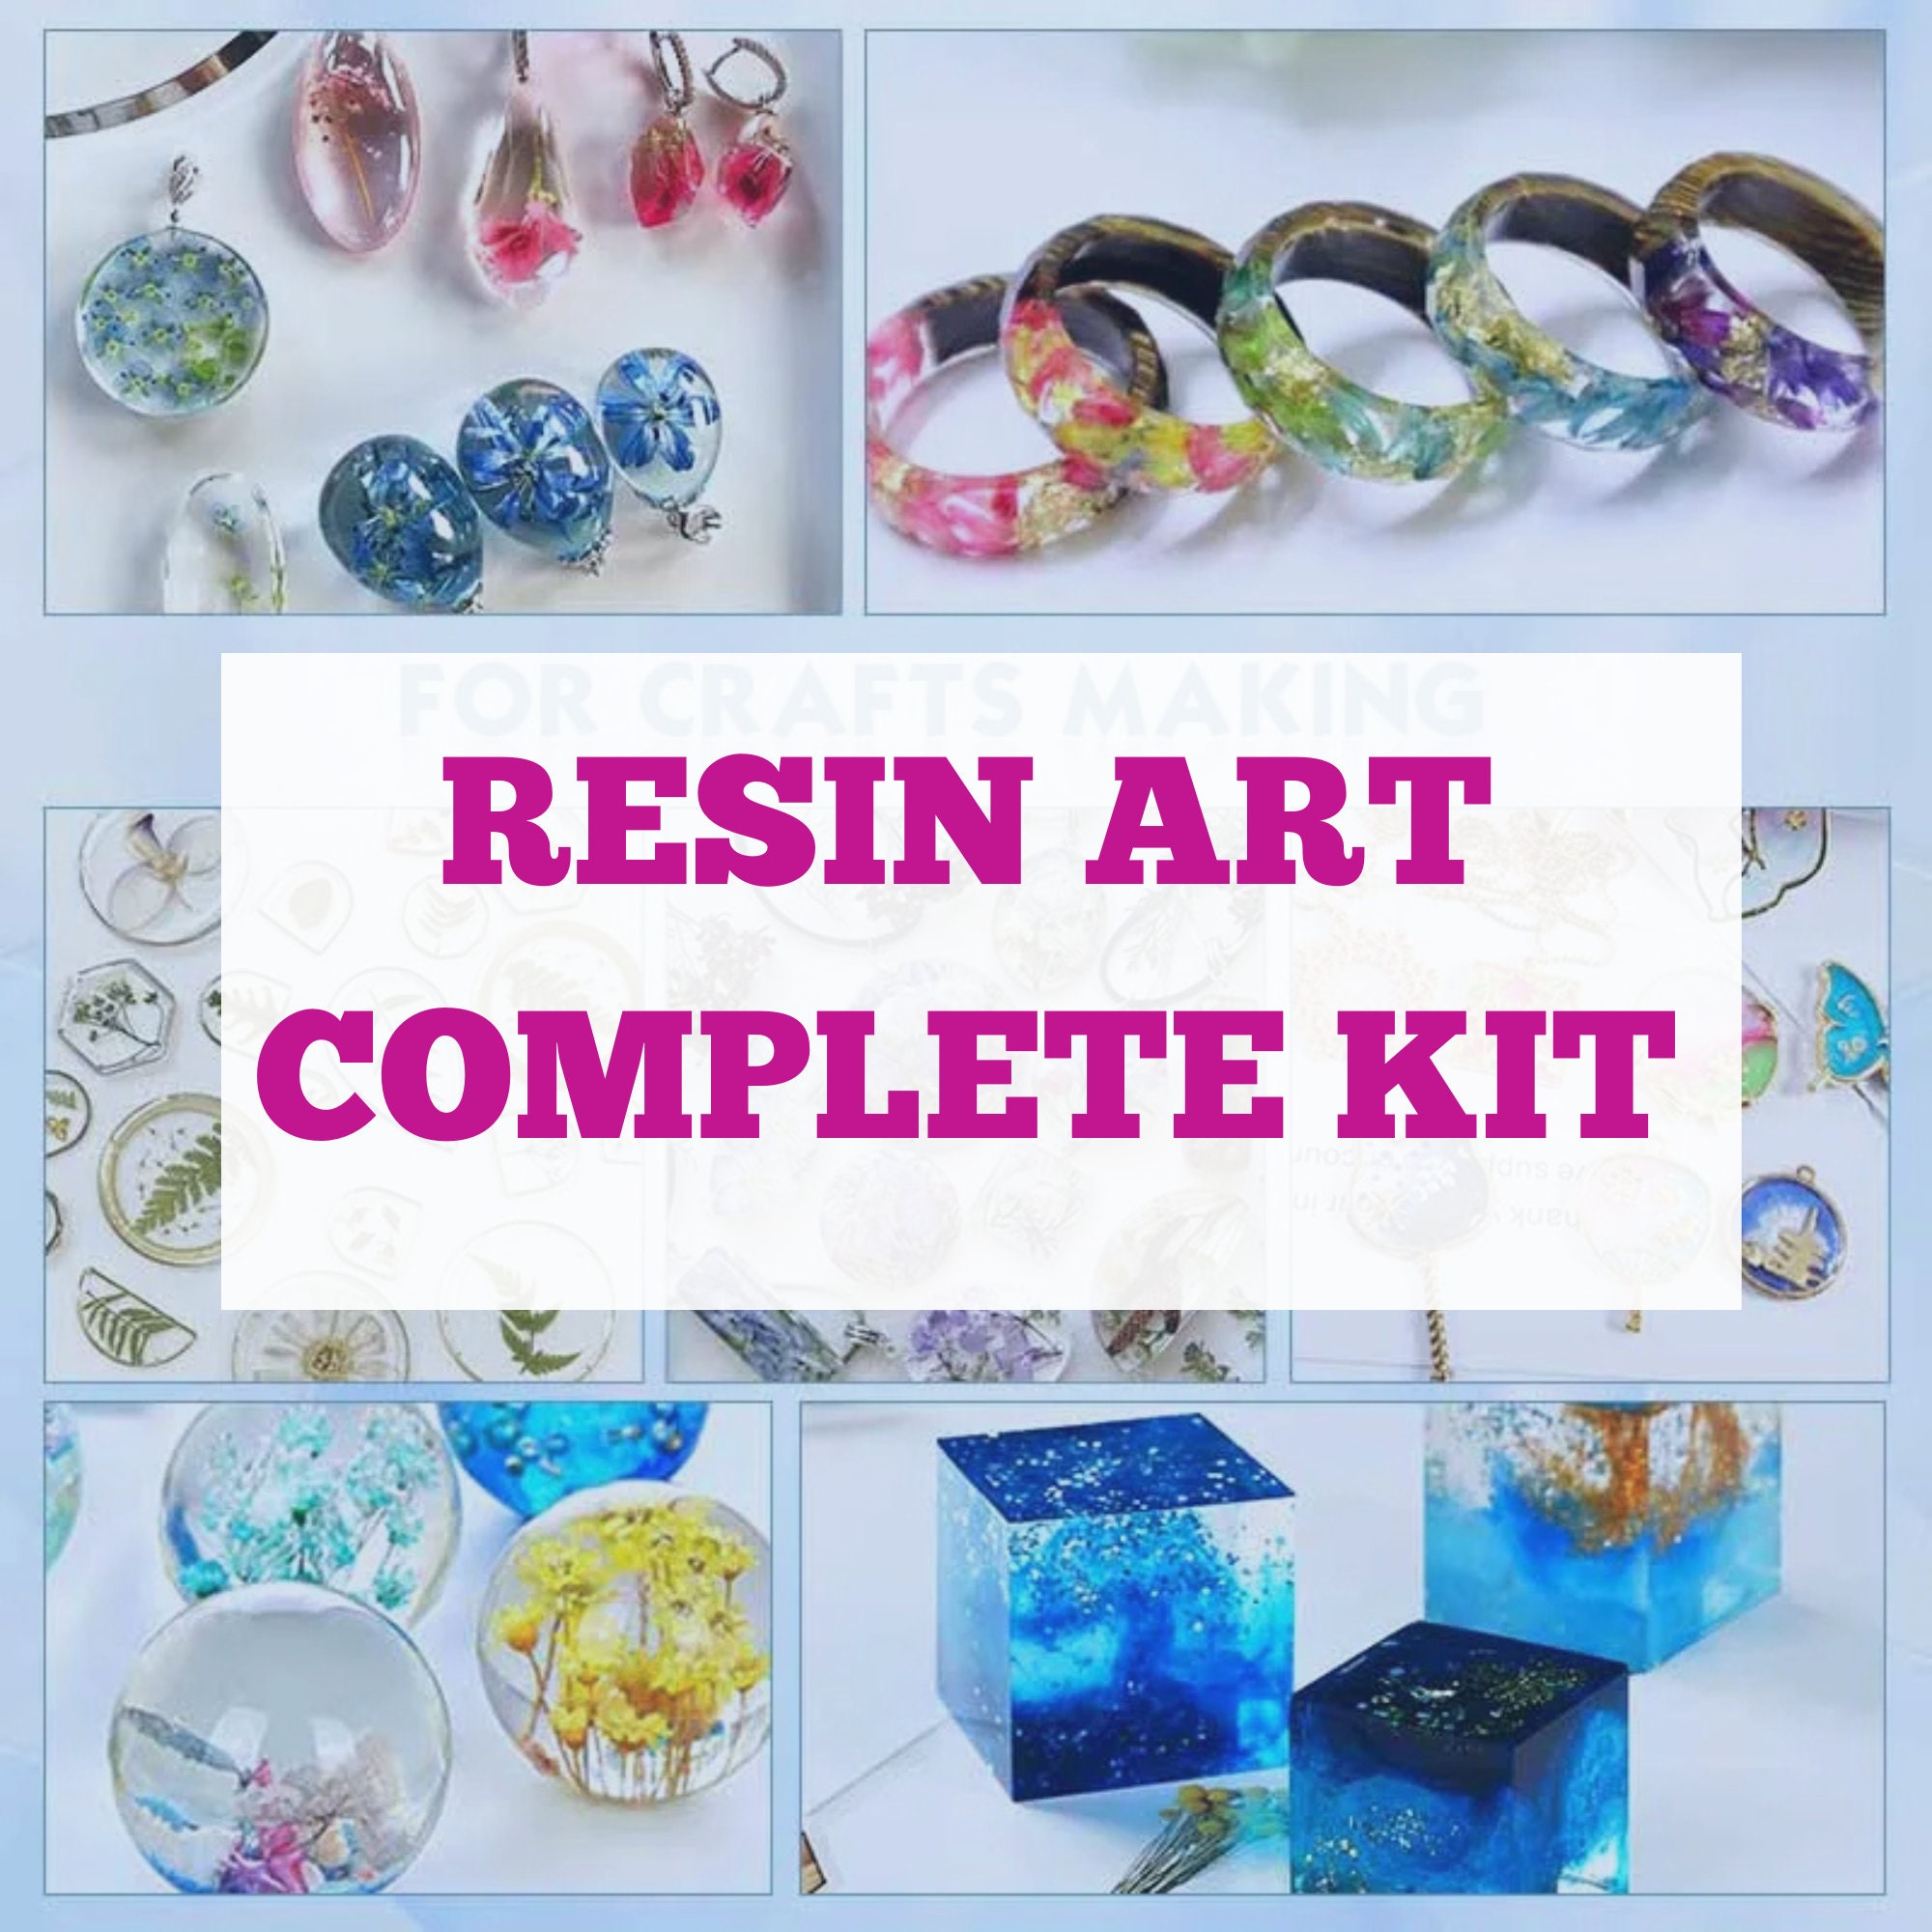  UV Resin Kit with Light, 136 Pcs UV Epoxy Resin Supplies with  Upgrade UV Lamp Jewelry Resin Molds Starter DIY Kits Tools for Clear  Casting Keychain Necklace Bracelet Making Arts Crafts